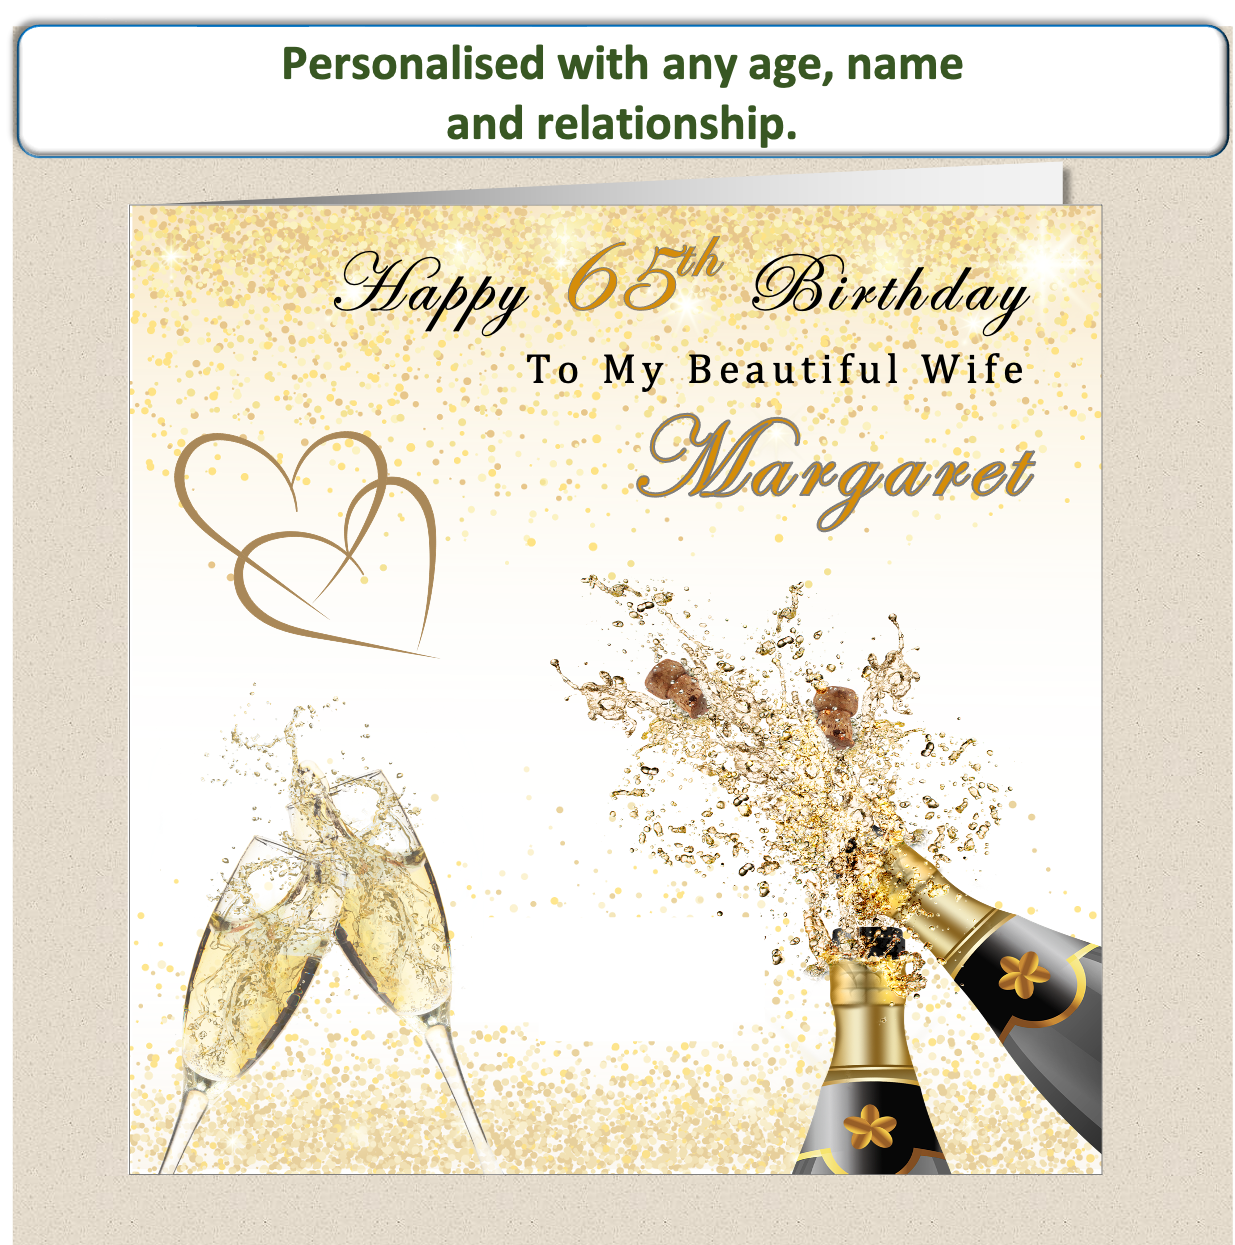 Personalised Champagne Birthday Card - For Her - Cham1